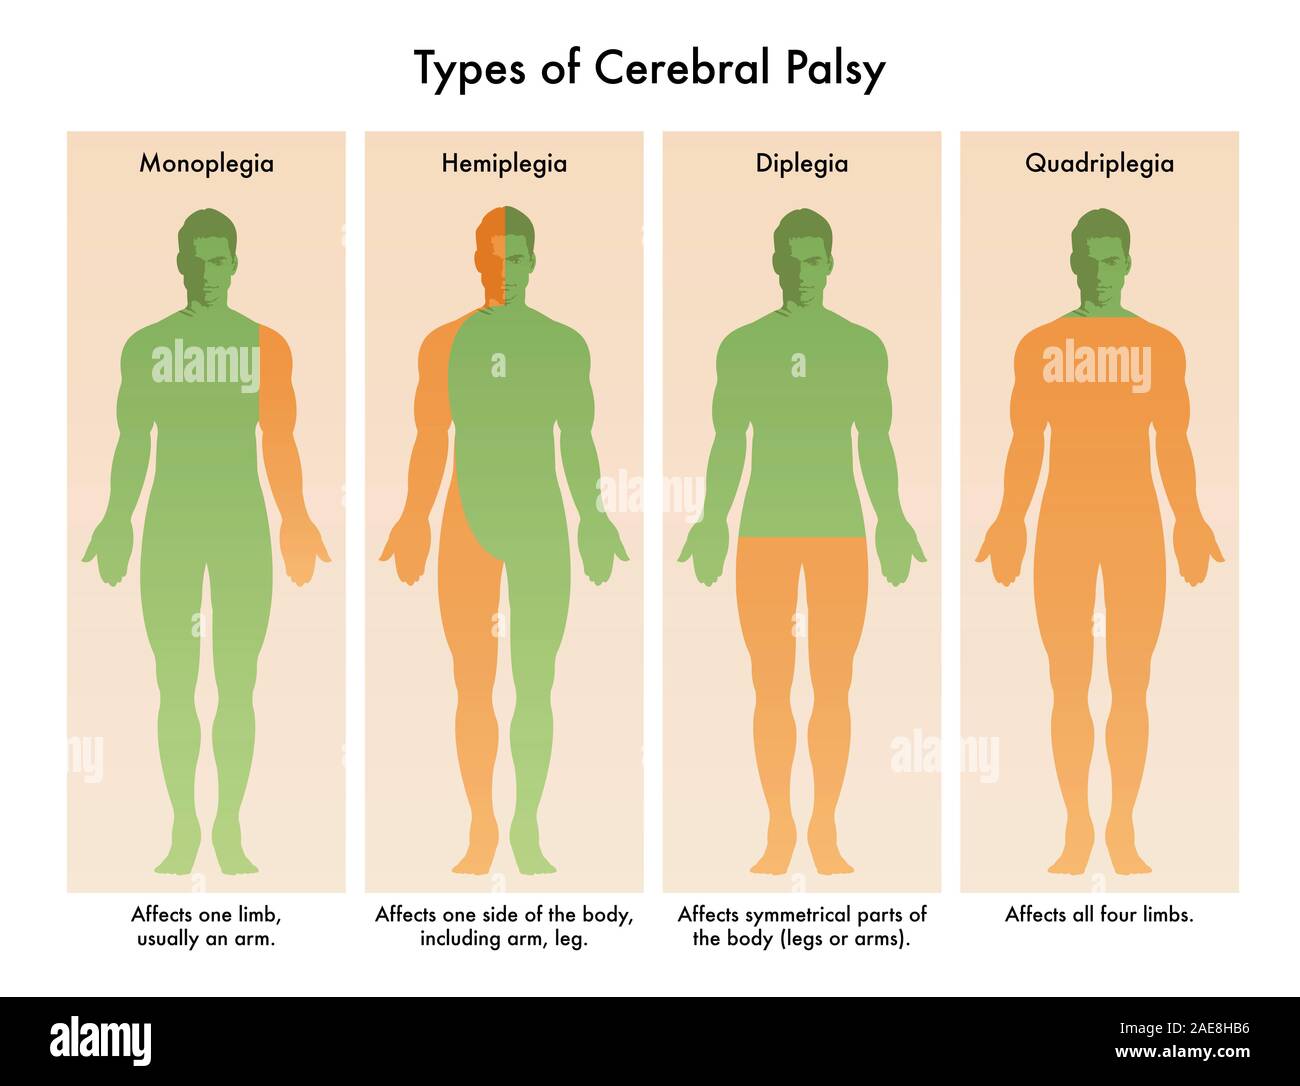 Forms of Cerebral Palsy illustrated in medical diagram. Stock Photo